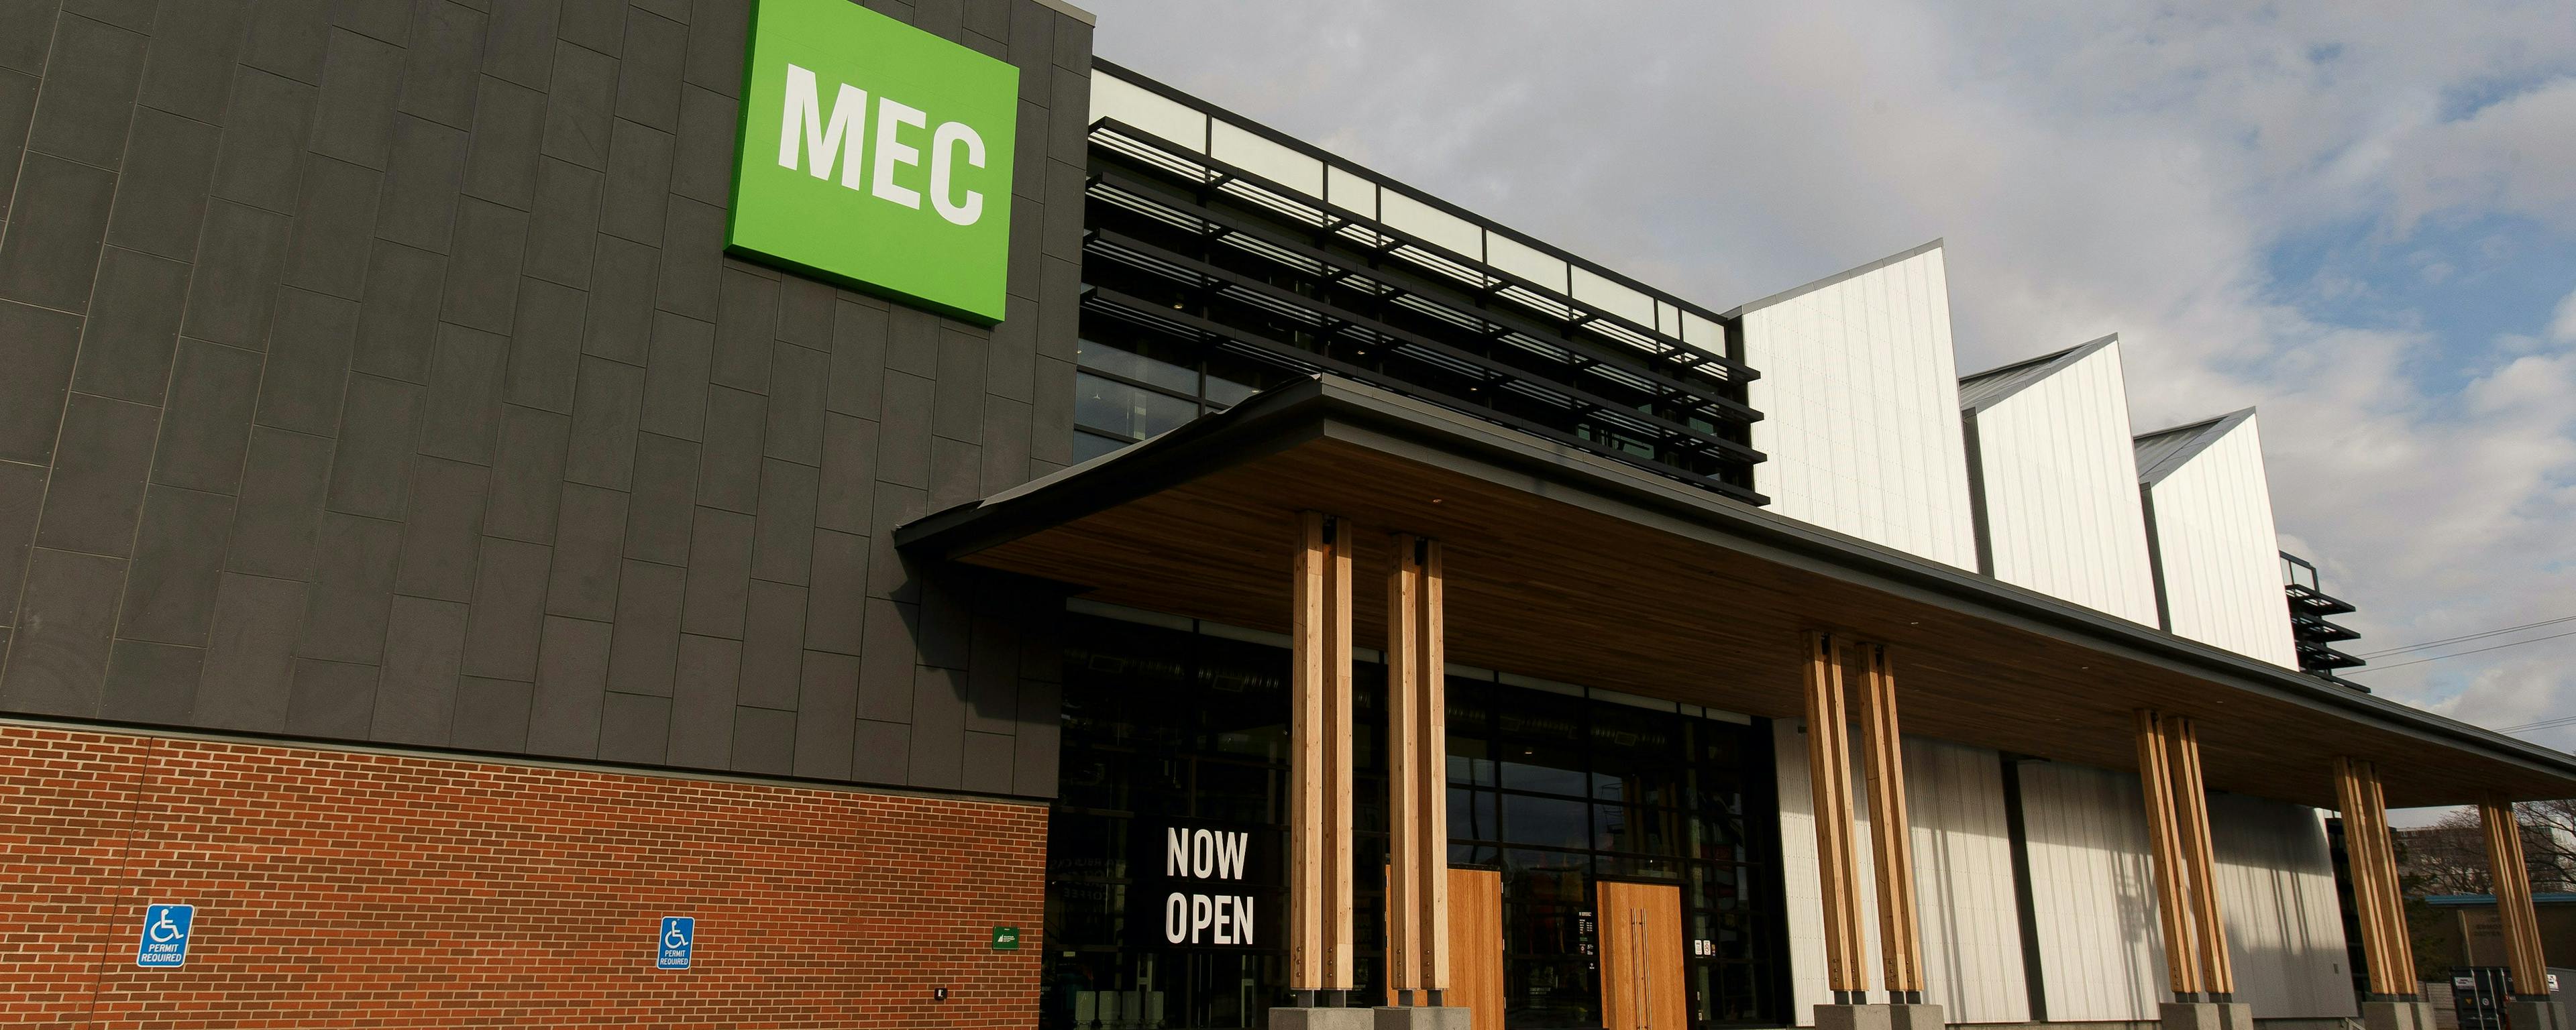 If you love trails, snow, water or fresh air, this is your store. Visit MEC Edmonton for outdoor gear, know-how and inspiration.